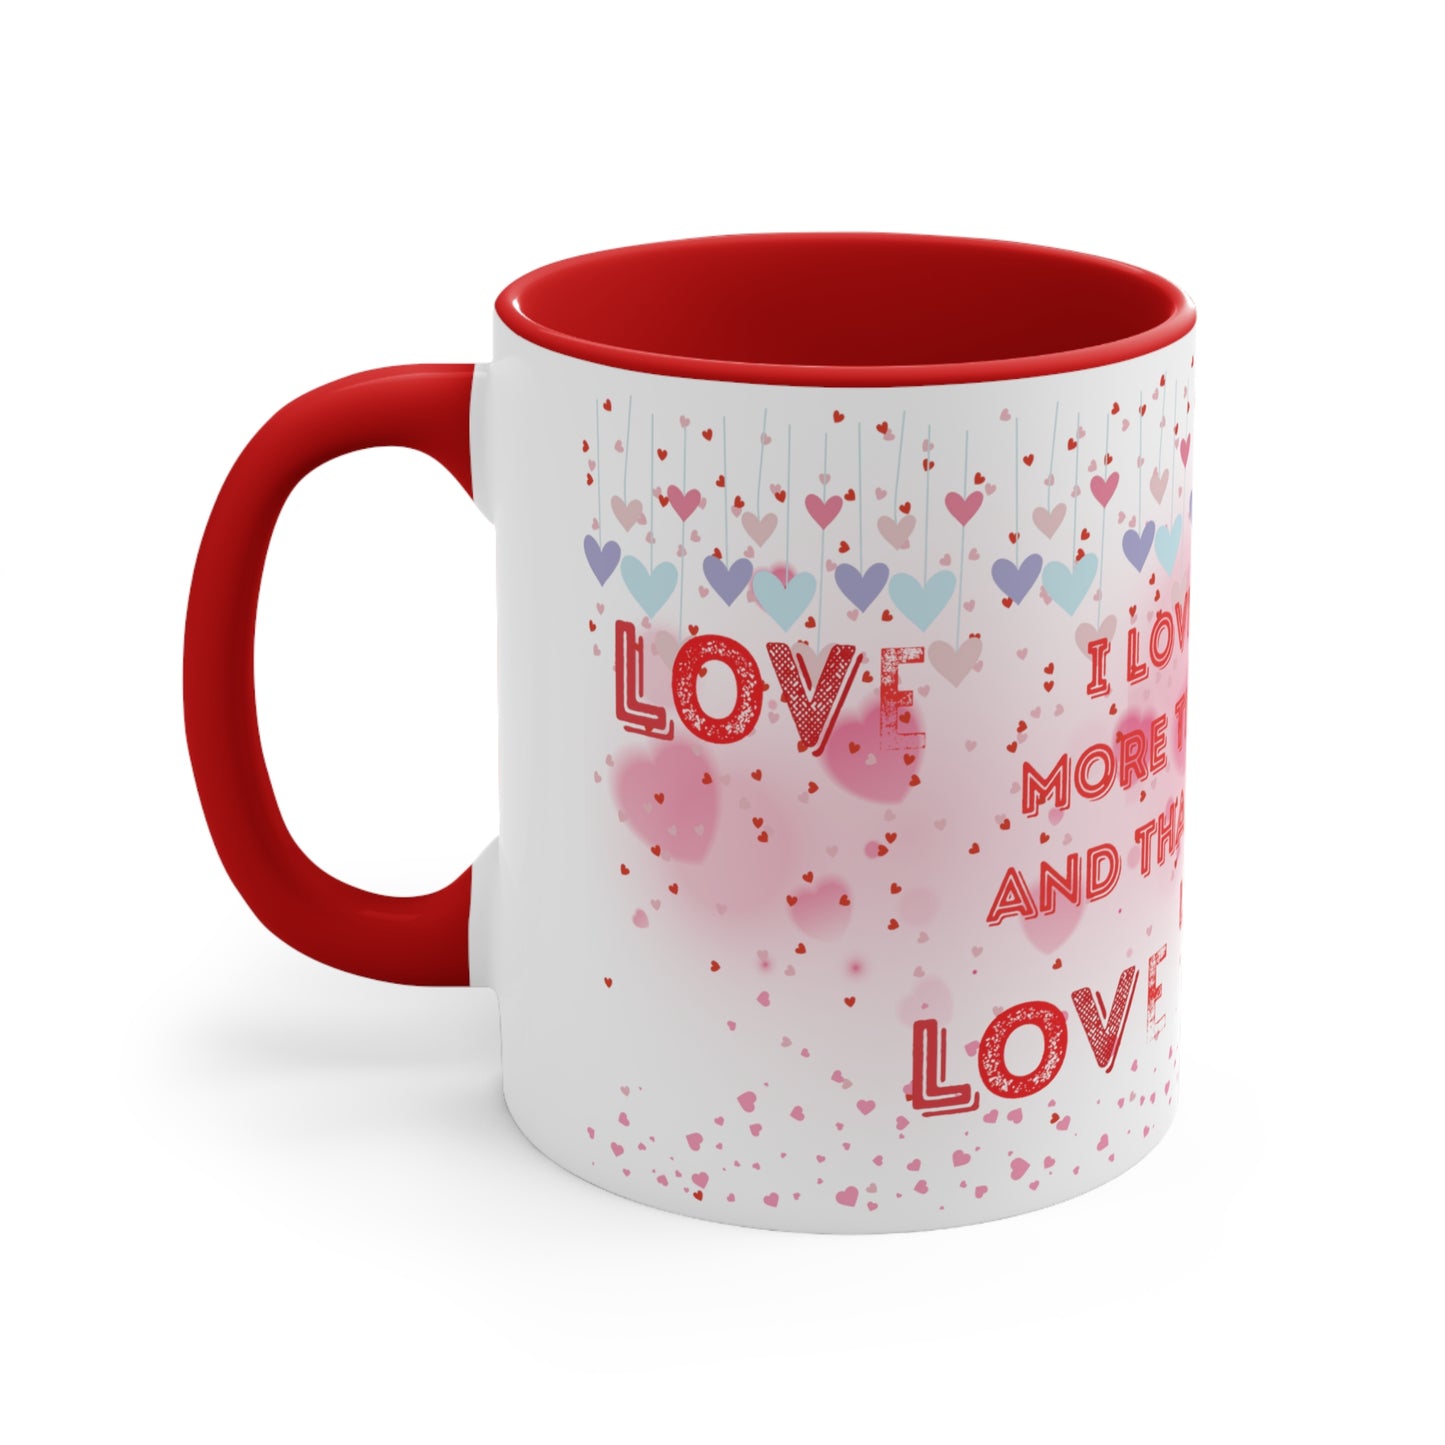 I Love You Even More Than Coffee" Two-Tone Coffee Mug - Brewed Affection!